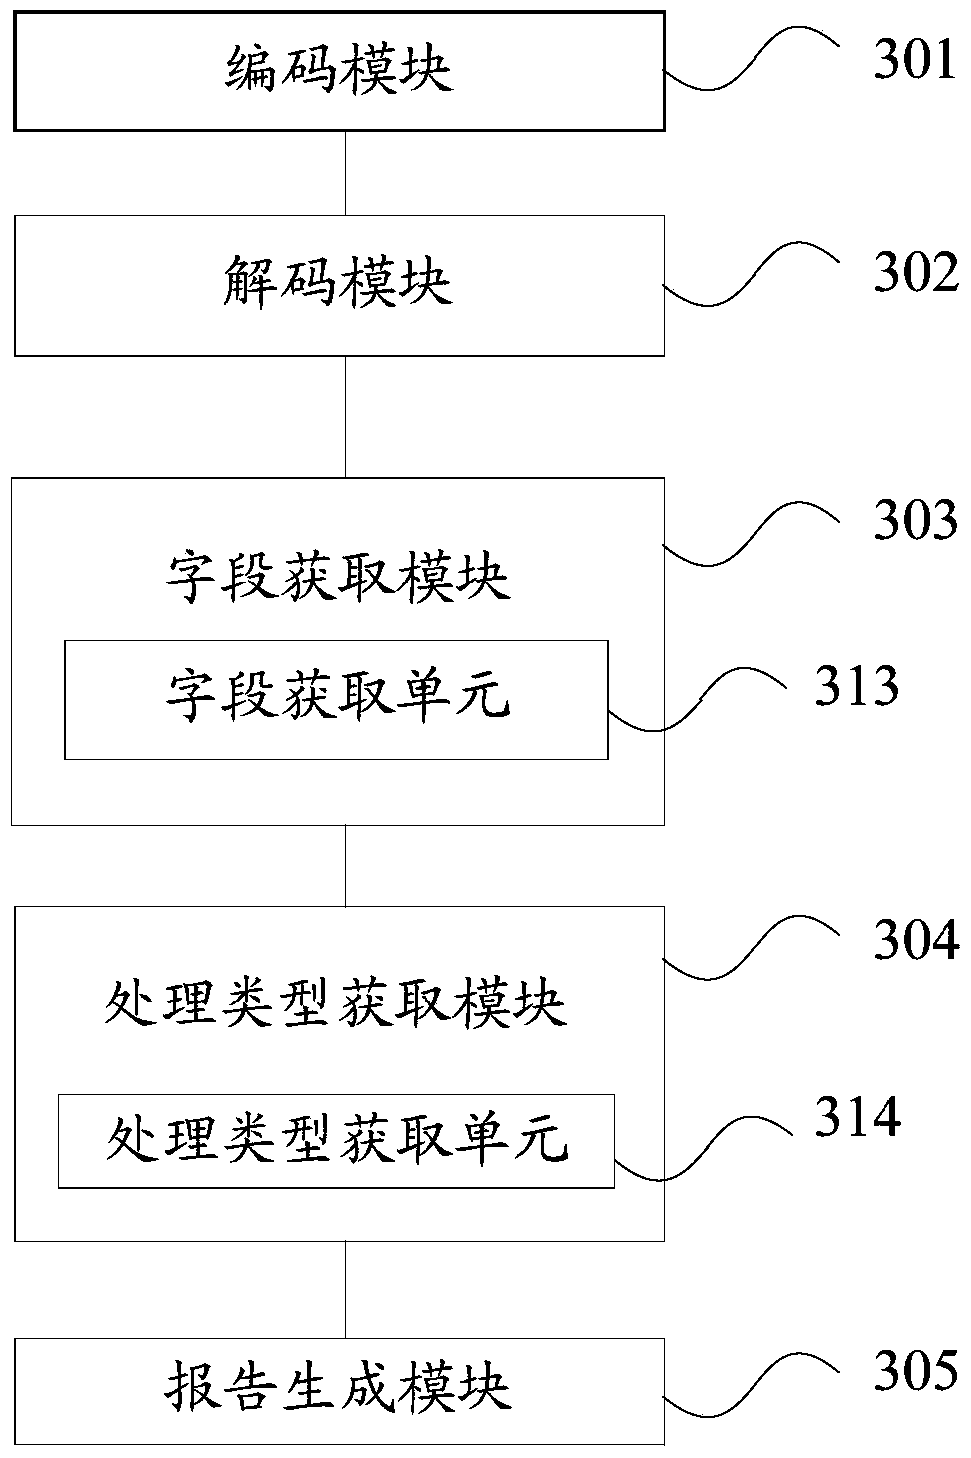 Method and device for generating inspection report